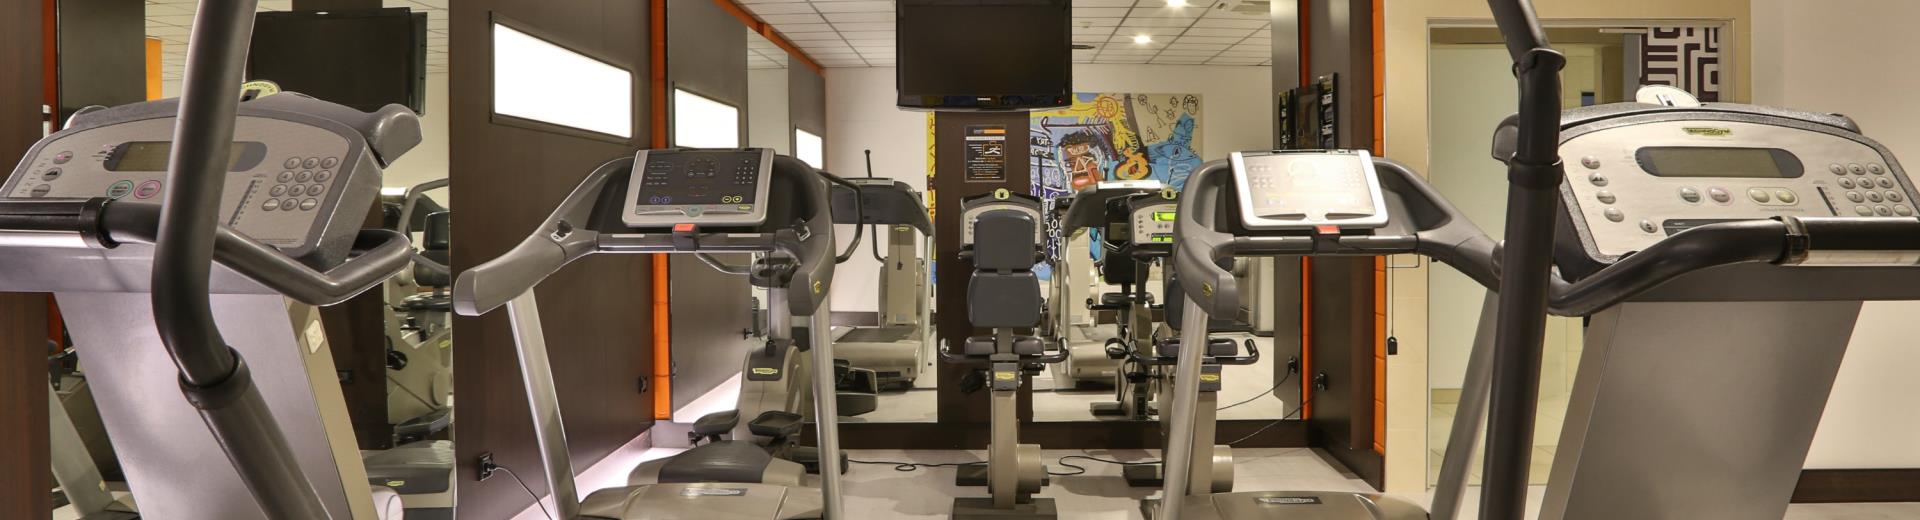 Fitness Area in the Hotel Galileo free and open 24h